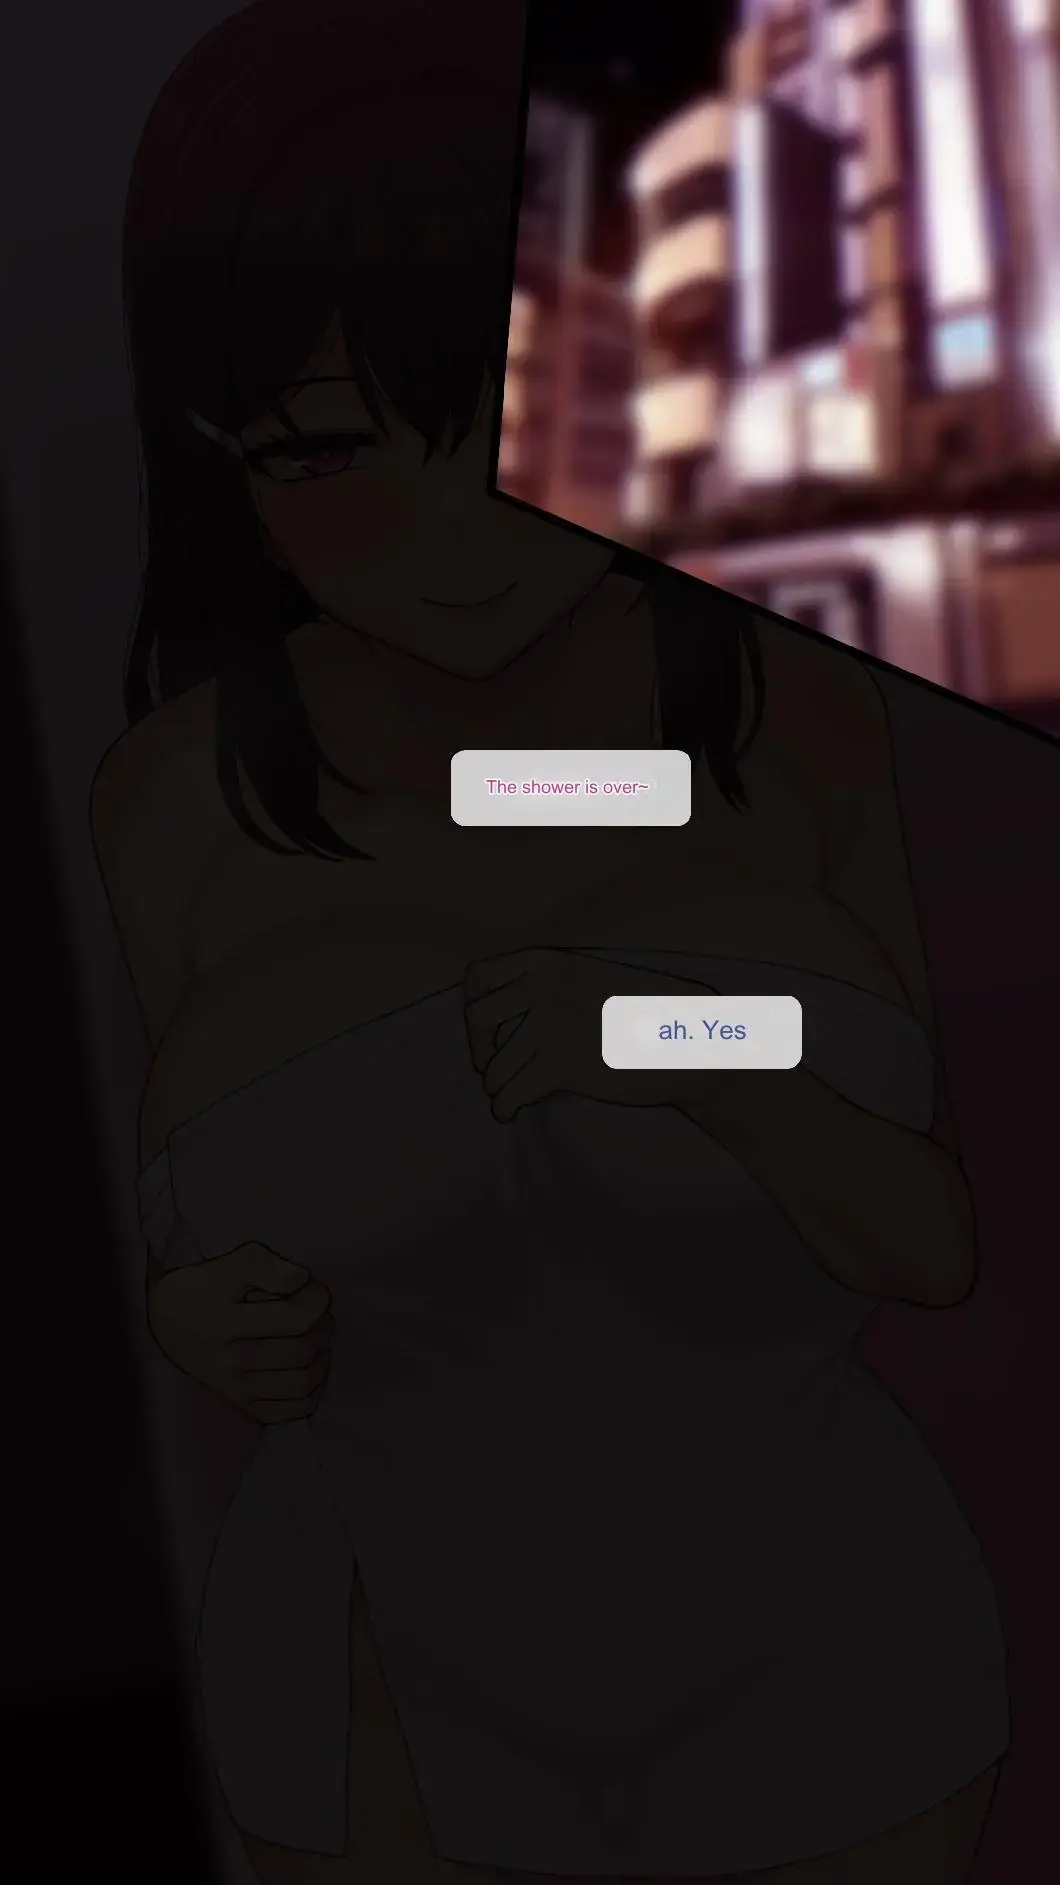 Read [Nt00] There's Something Loose in Her Head - Ending - Fhentai.net